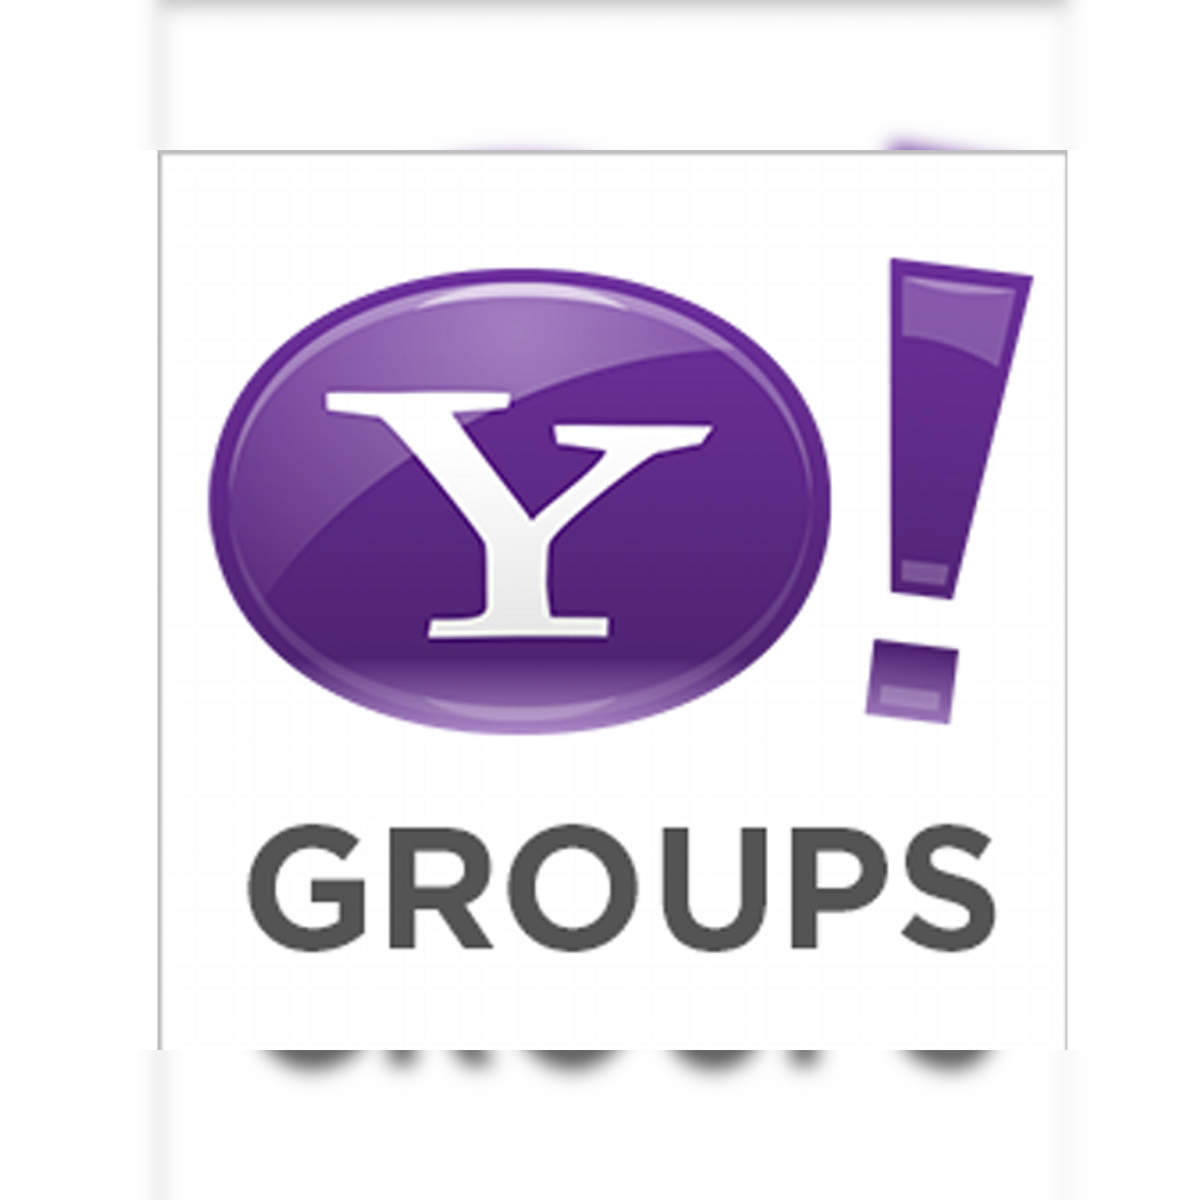 Yahoo Launches Games Network Platform and Classic Games Site